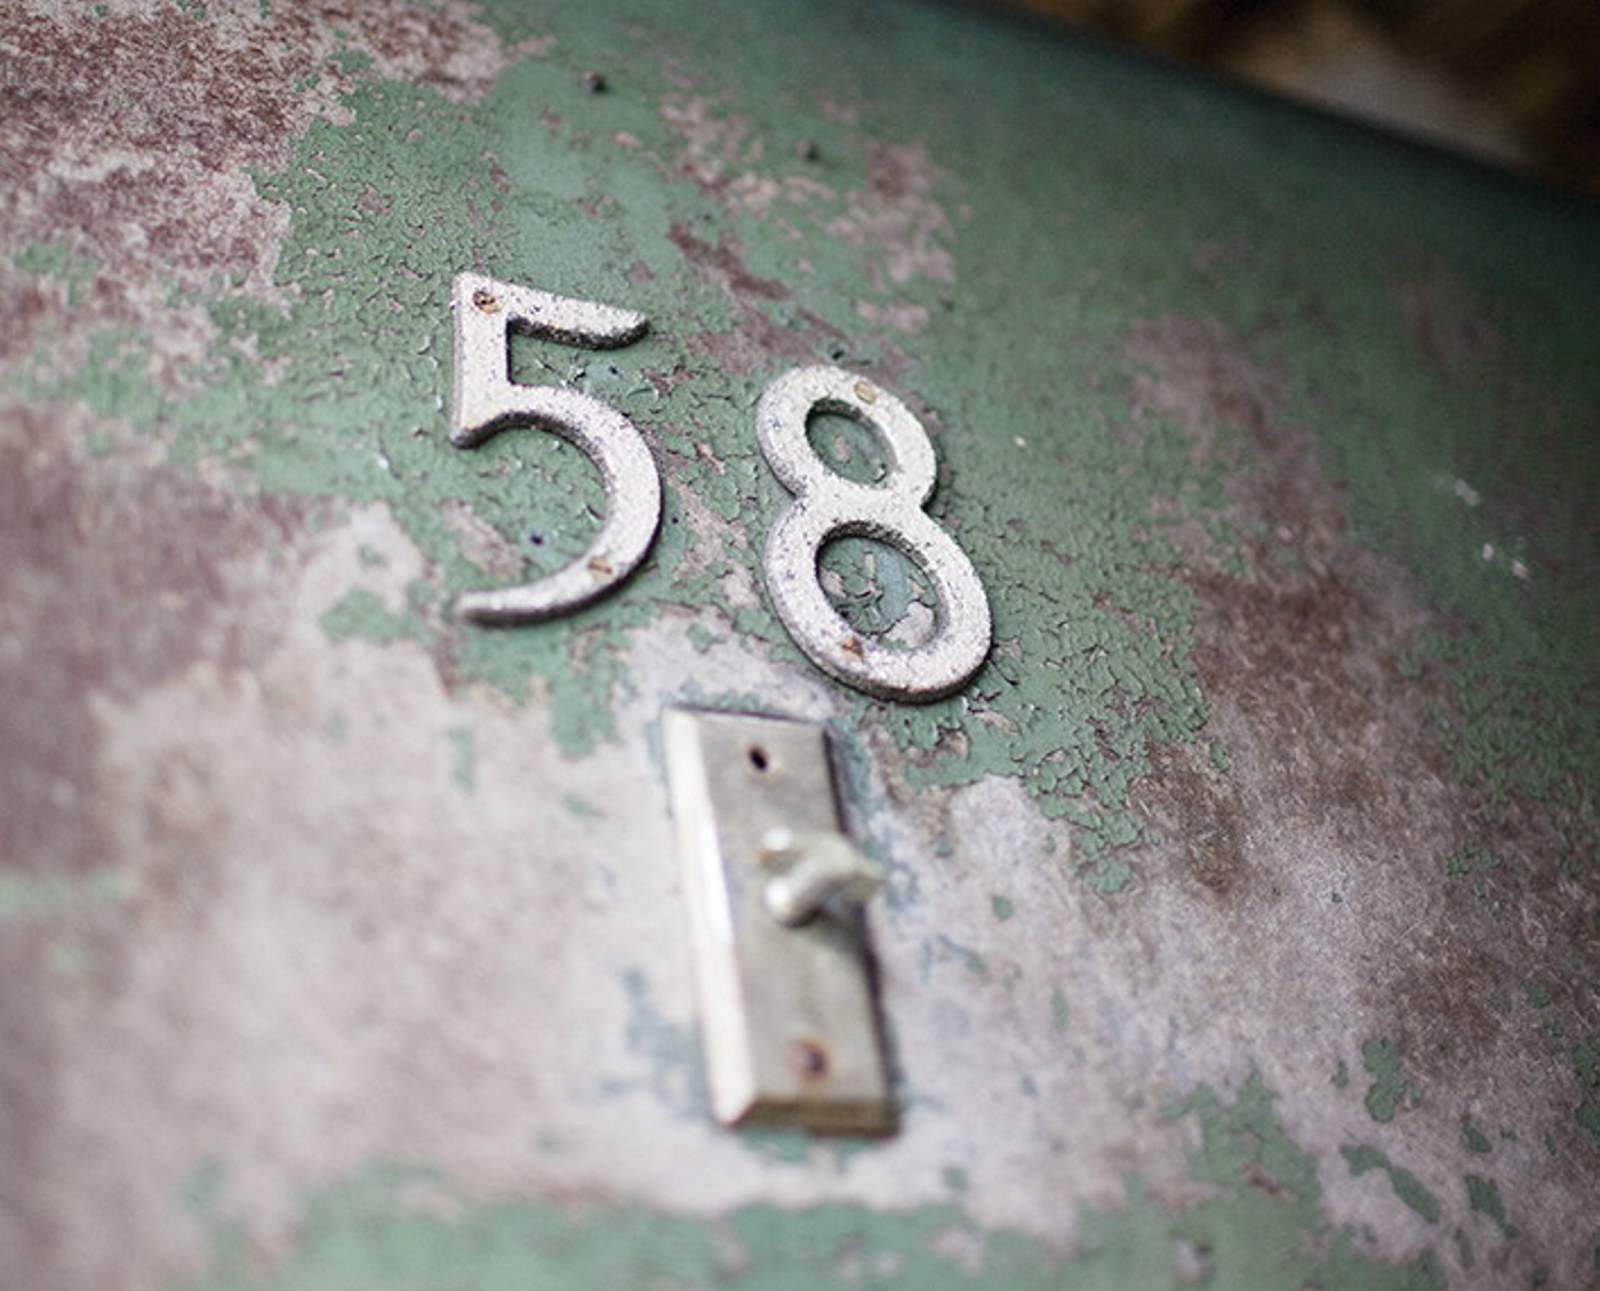 The number 58 on a faded green-painted surface with door bell below.